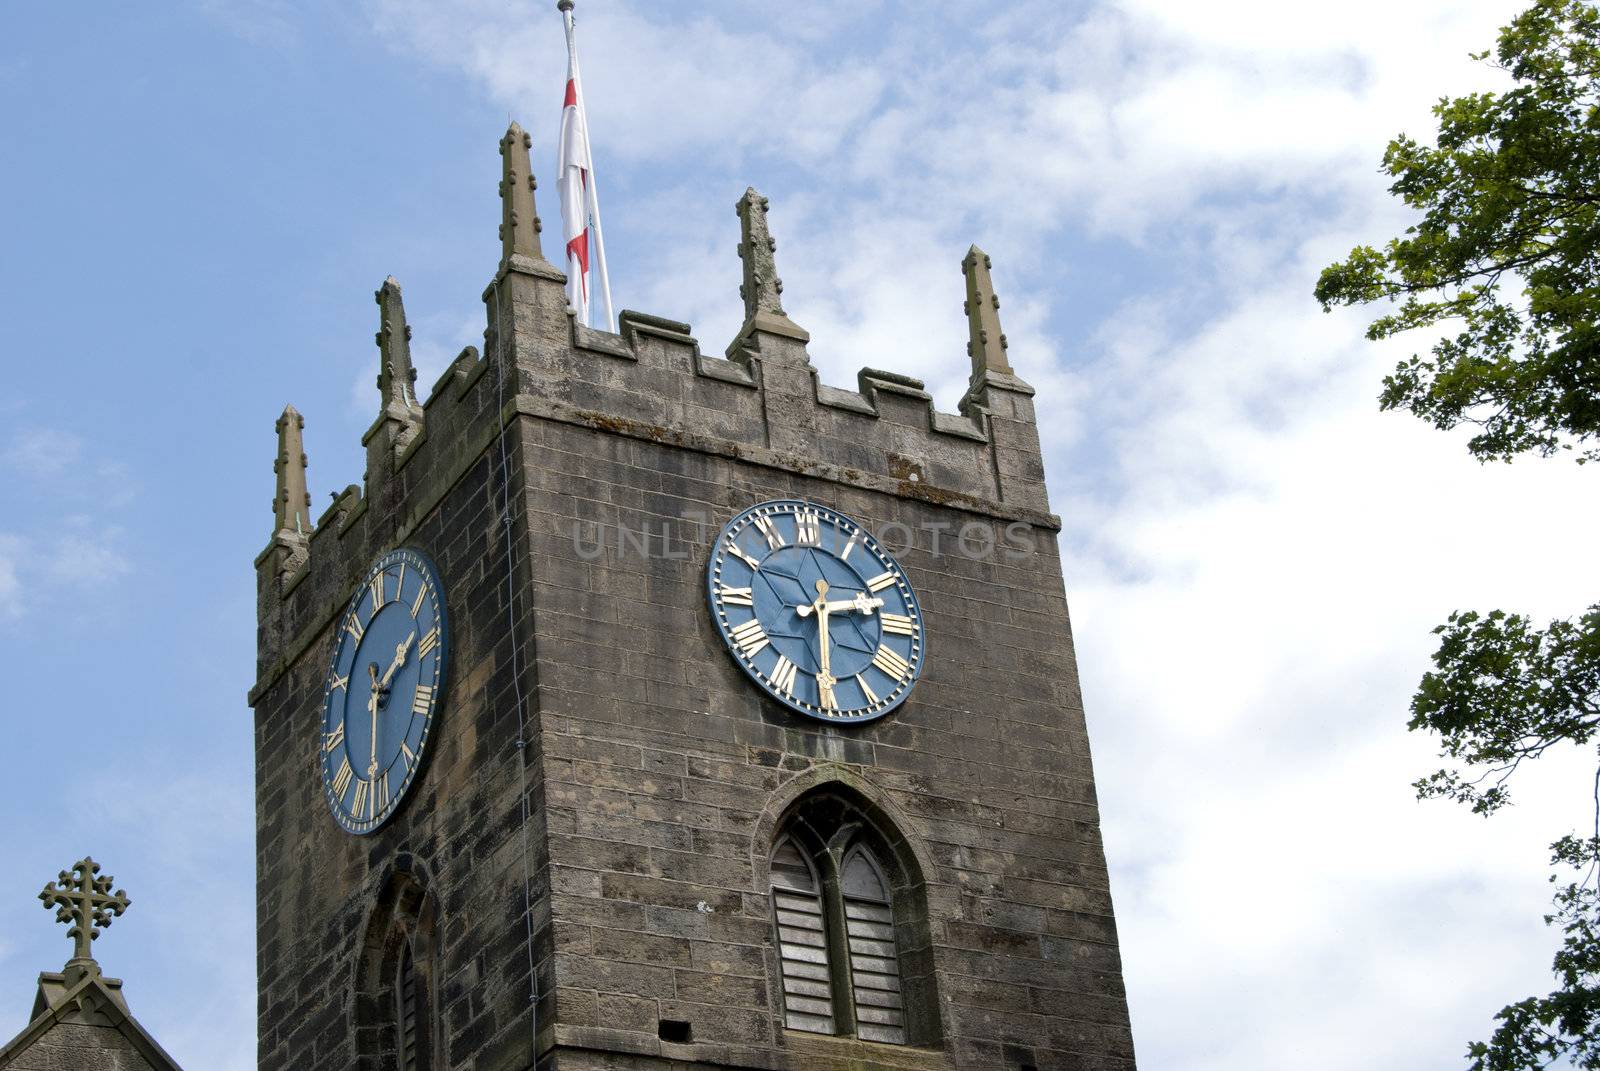 The Clocktower of the Parish Church of St Michael and All Angels in Haworth Yorkshire